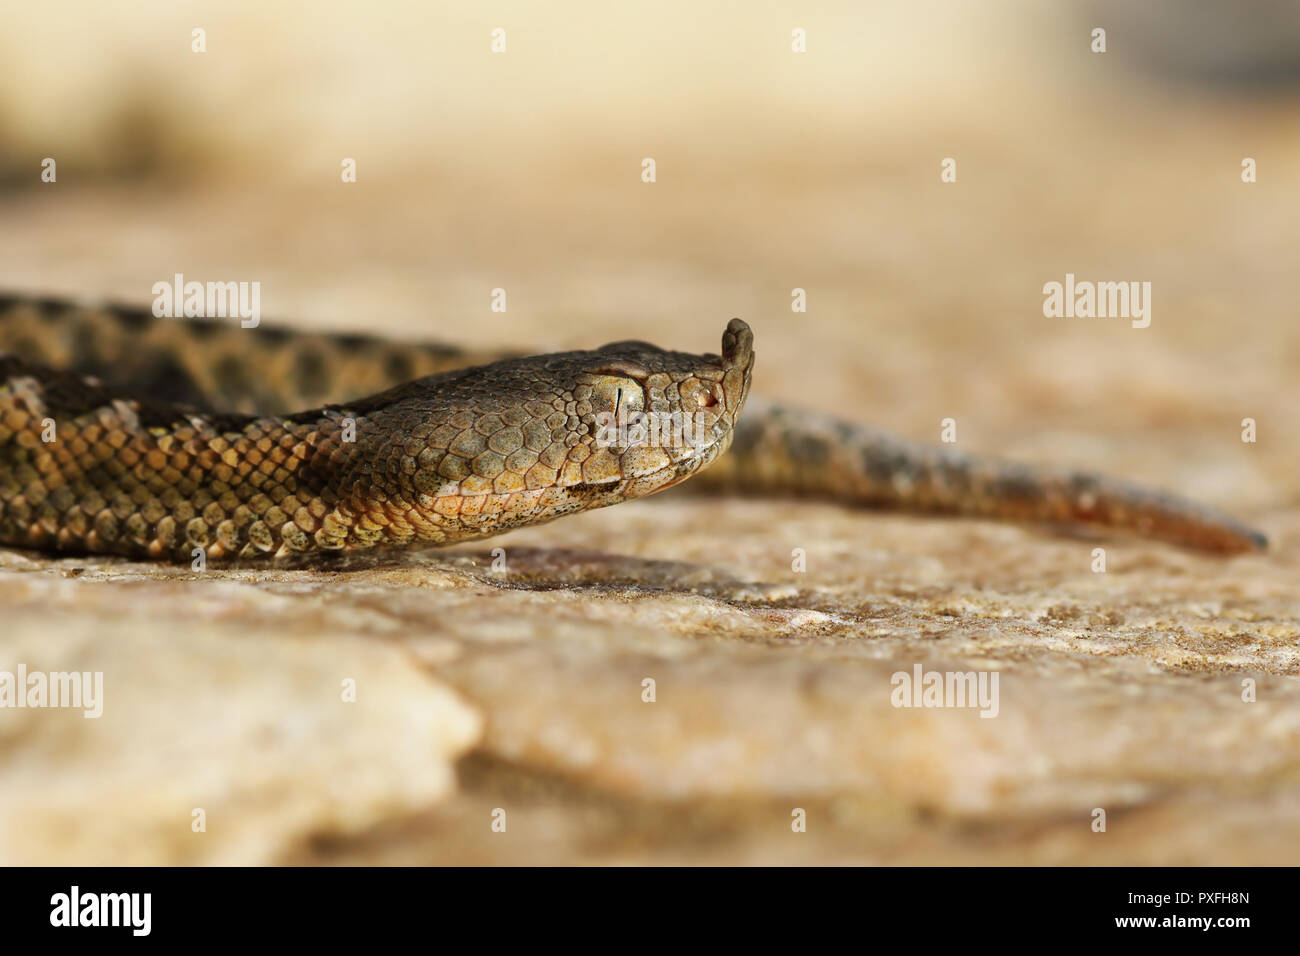 toxic european viper portrait, the nose horned adder ( Vipera ammodytes ); this is one of the most dangerous and poisonous snakes from Europe Stock Photo